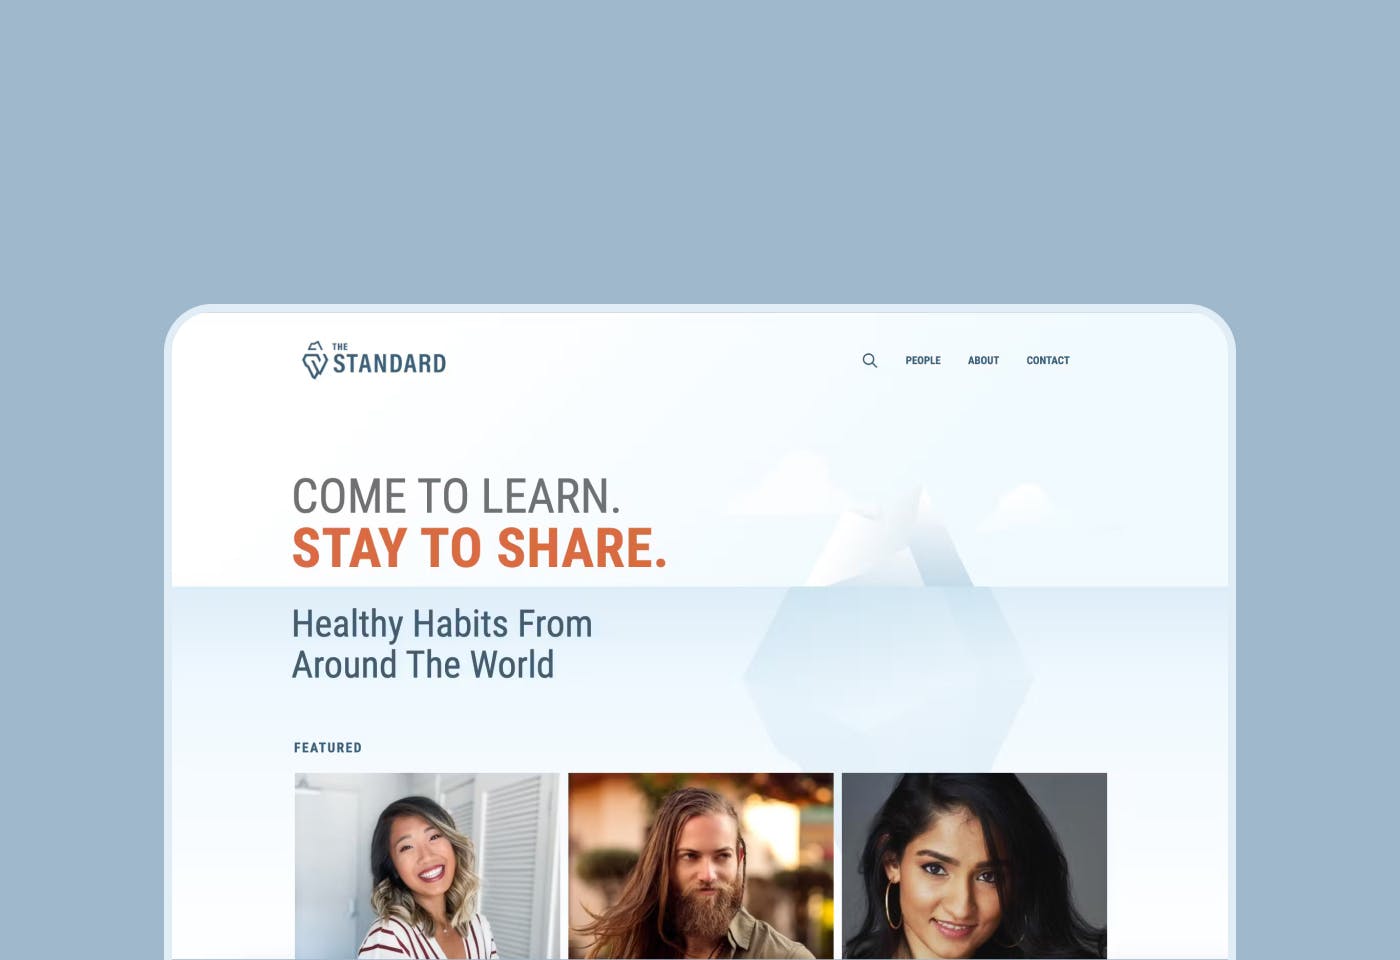 Image of The Standard website with the heading "Come to learn, stay to share."